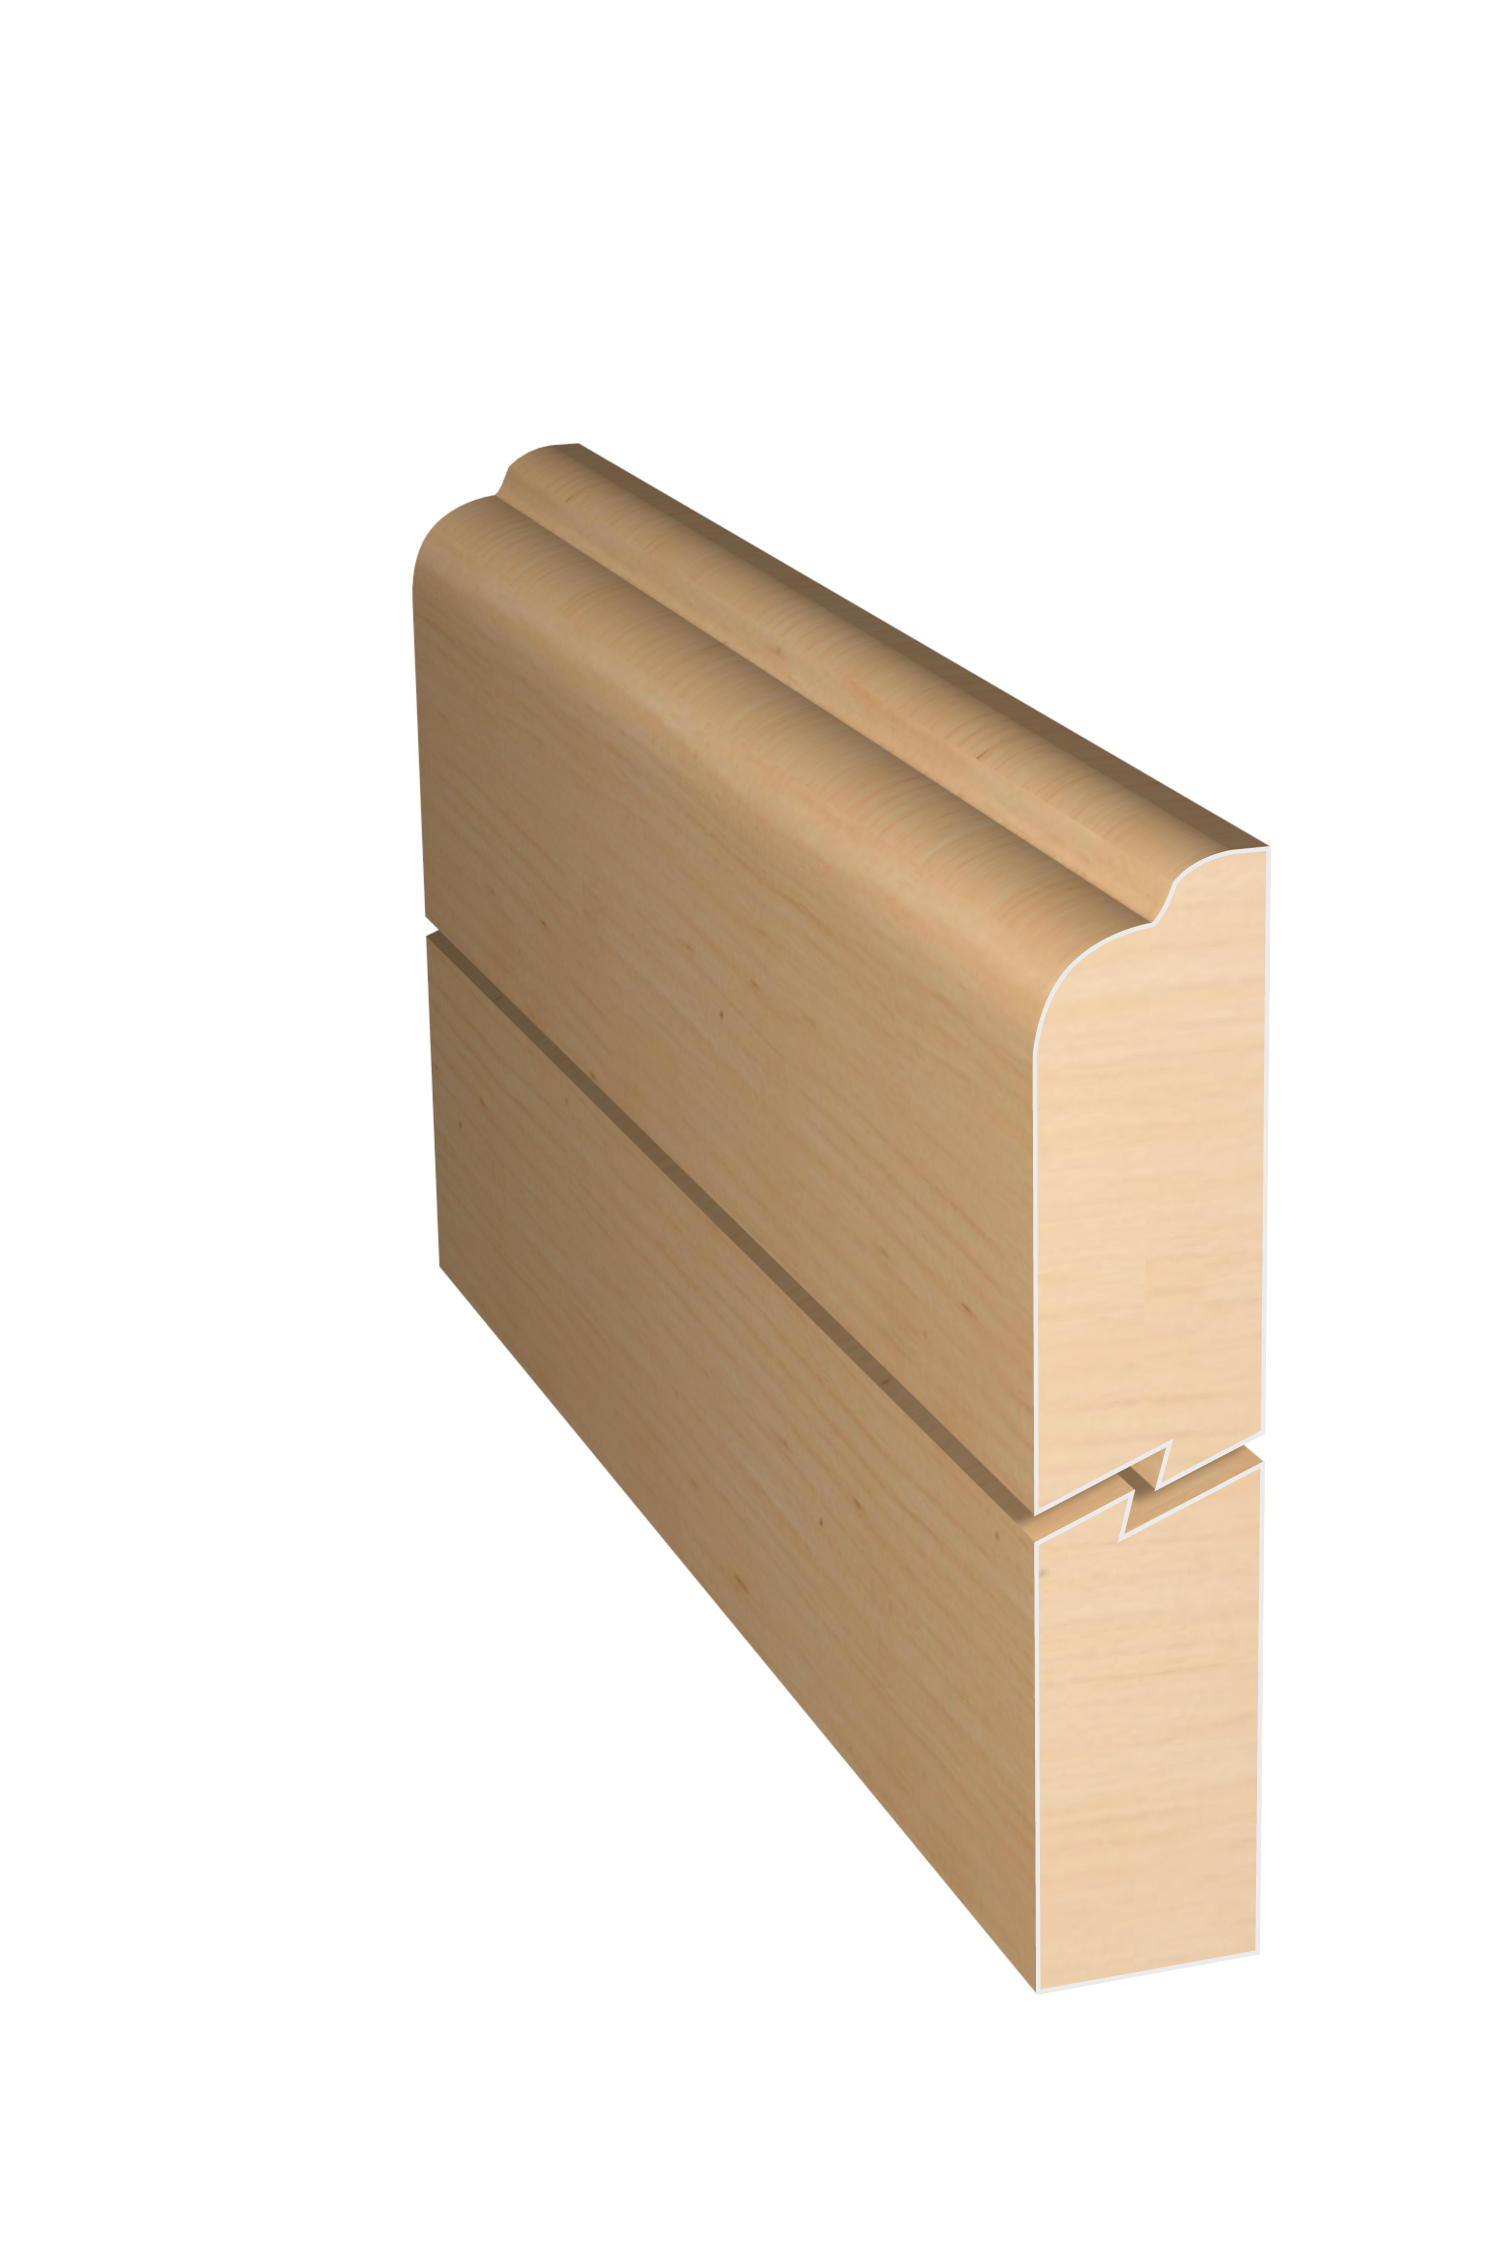 Three dimensional rendering of custom edge profile wood molding SKPL58 made by Public Lumber Company in Detroit.